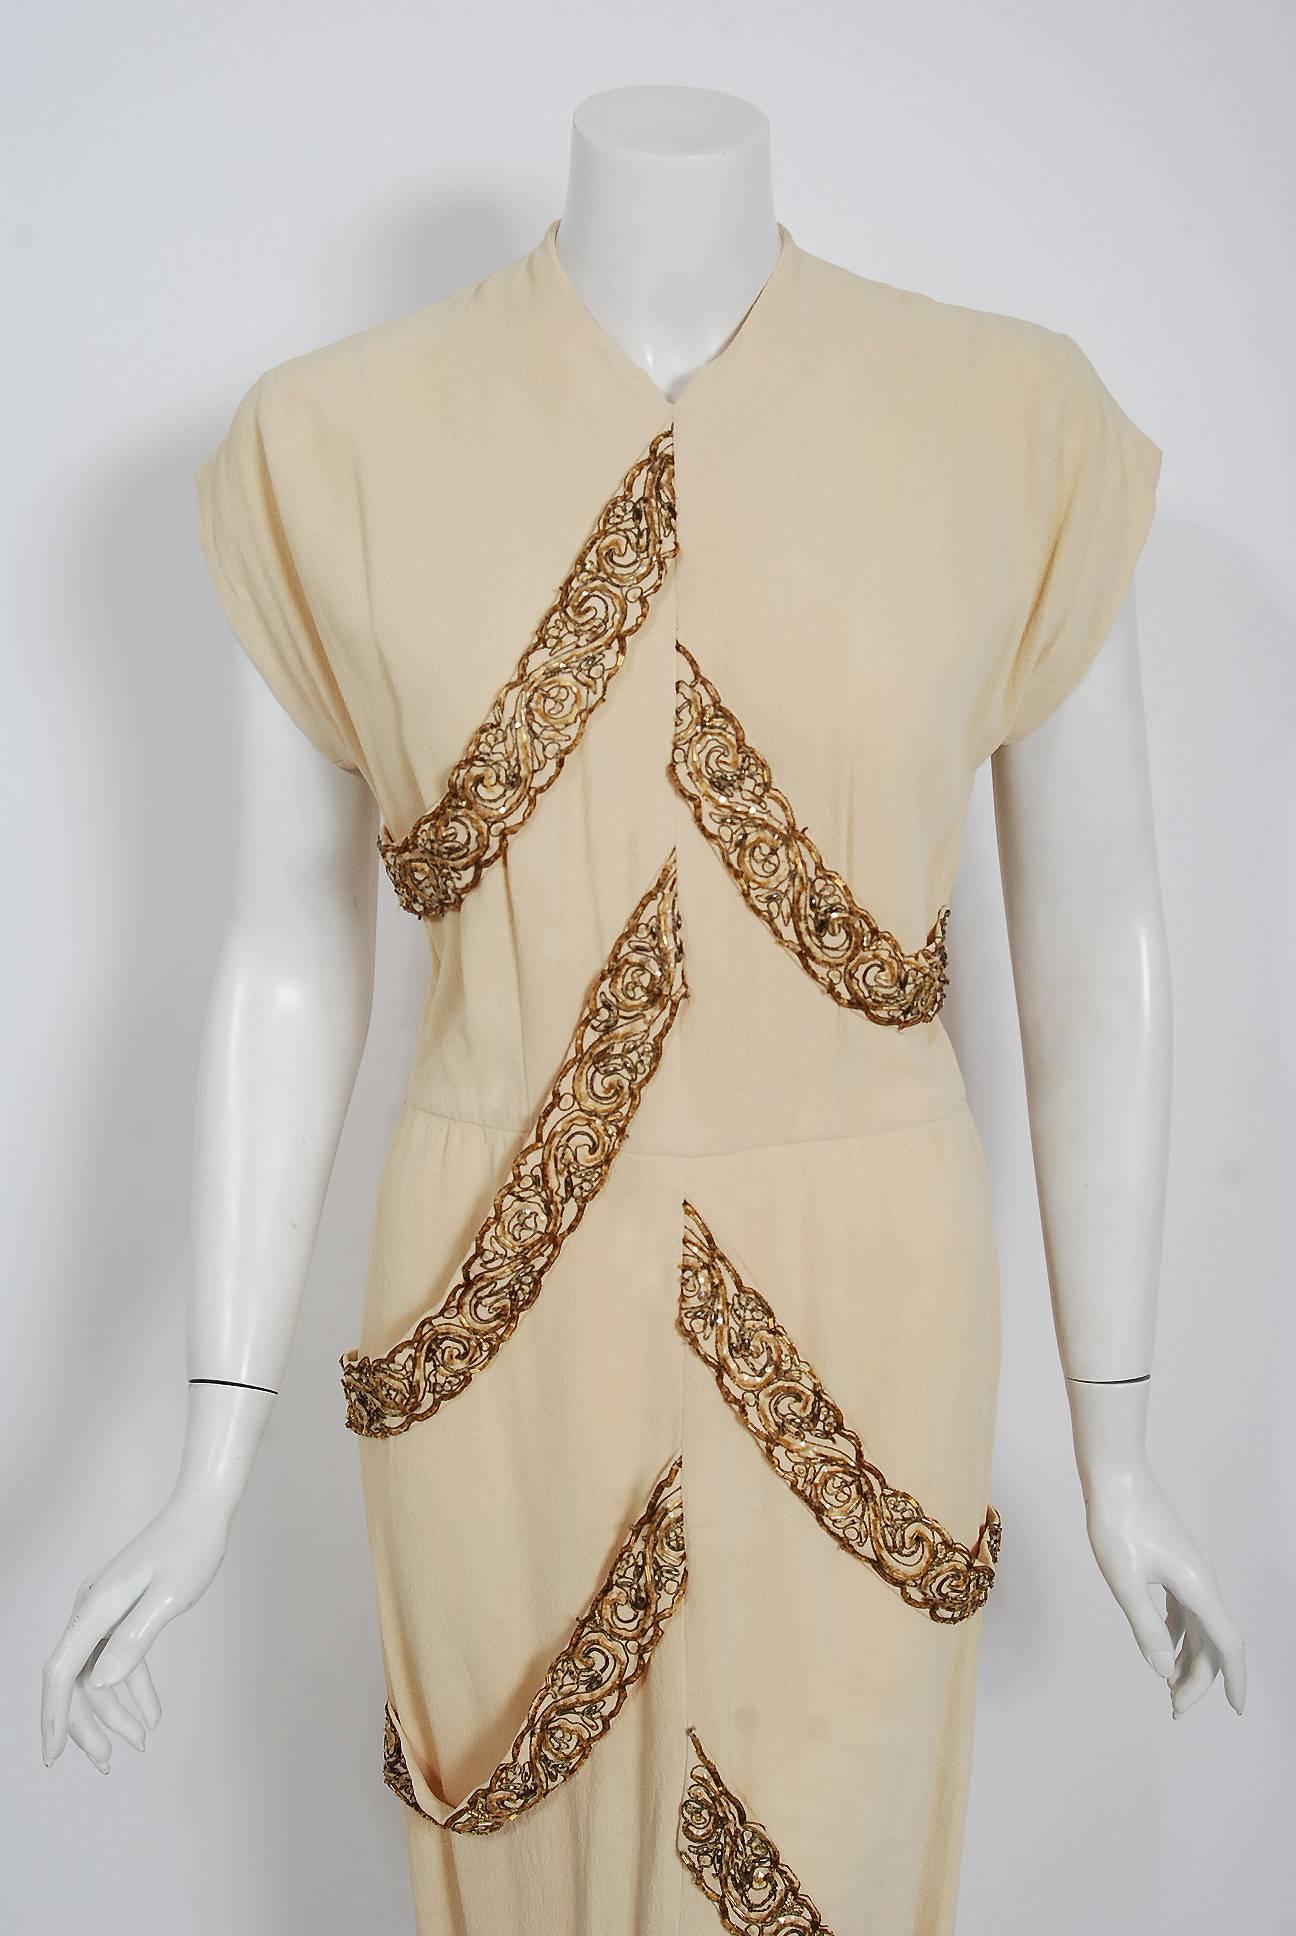 Breathtaking Anna Miller Couture pale-yellow crepe gown dating back to the mid 1940's. Anna Miller was the sister of acclaimed designer Maurice Rentner. However, she was not the designer of her label. The designer at Anna Miller in the late 1940's